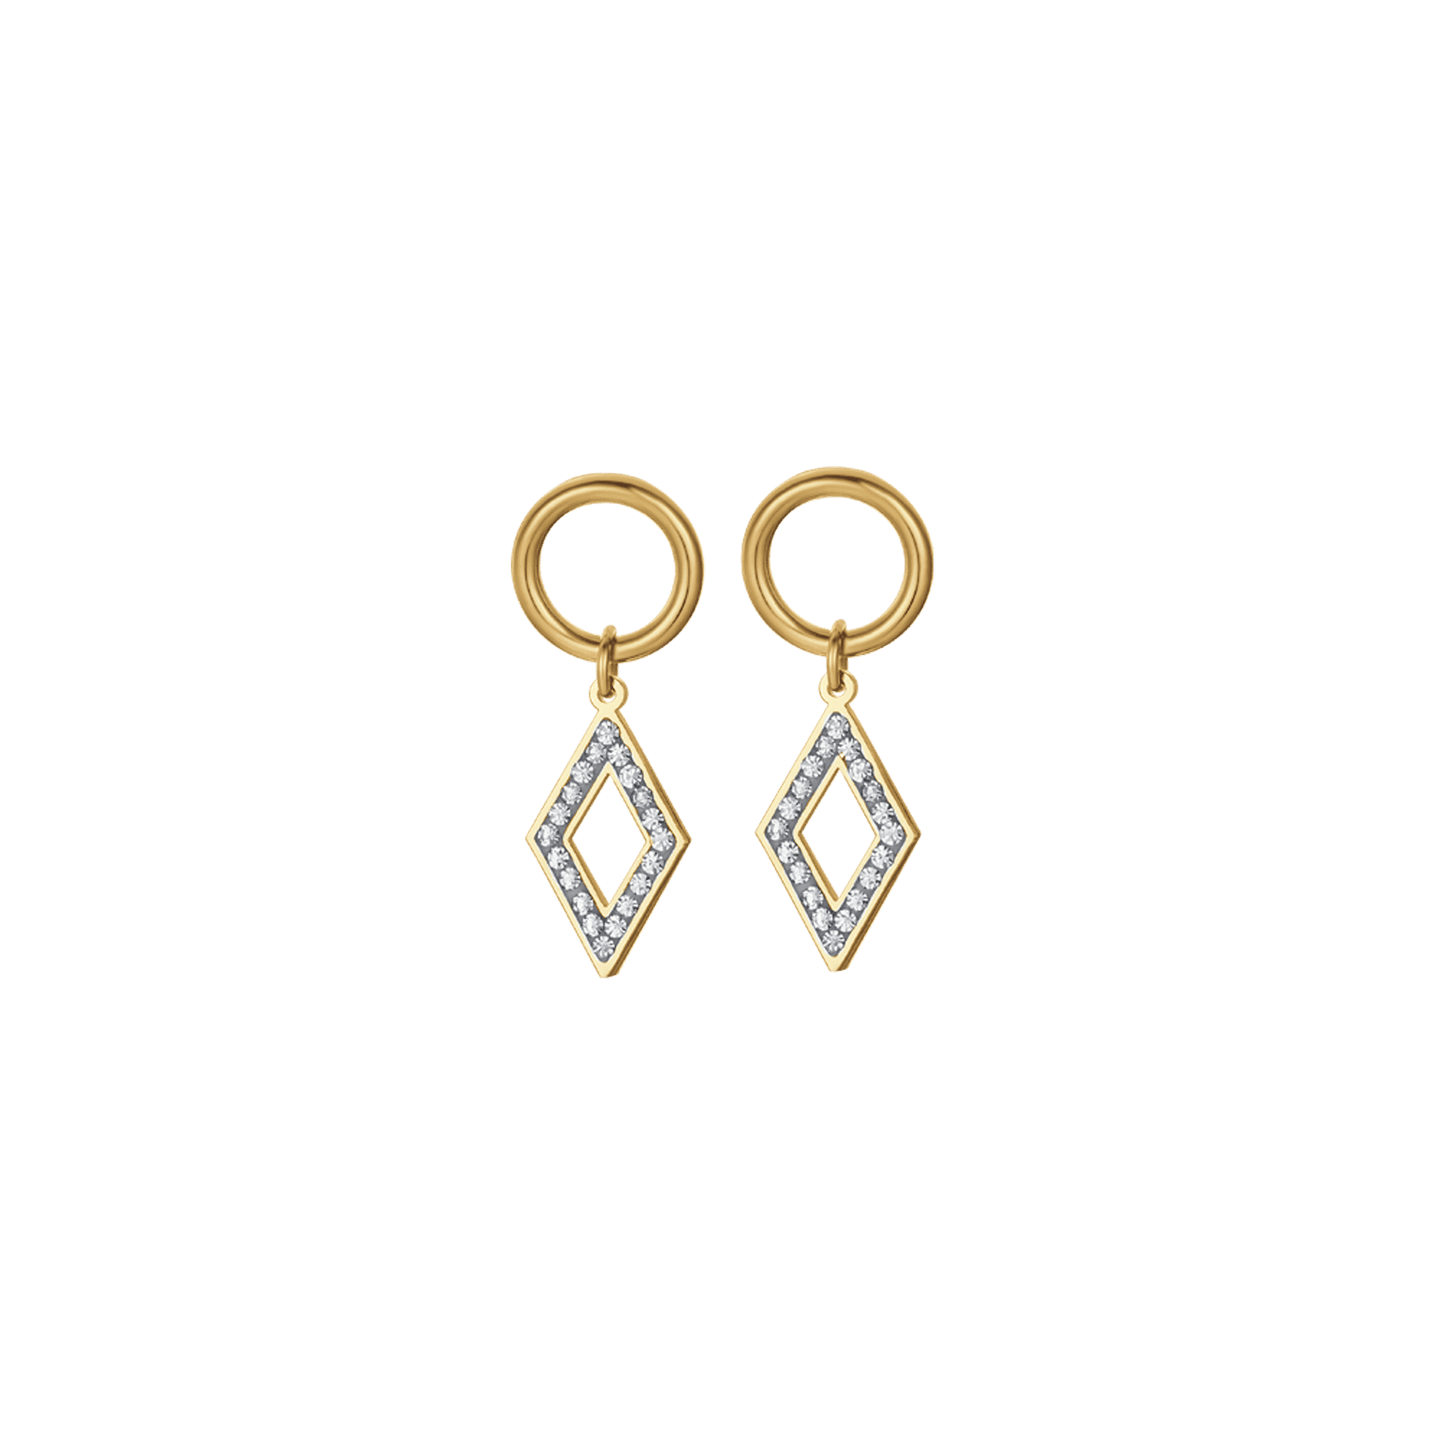 WOMAN'S EARRINGS IN STEEL WITH WHITE CRYSTALS Luca Barra